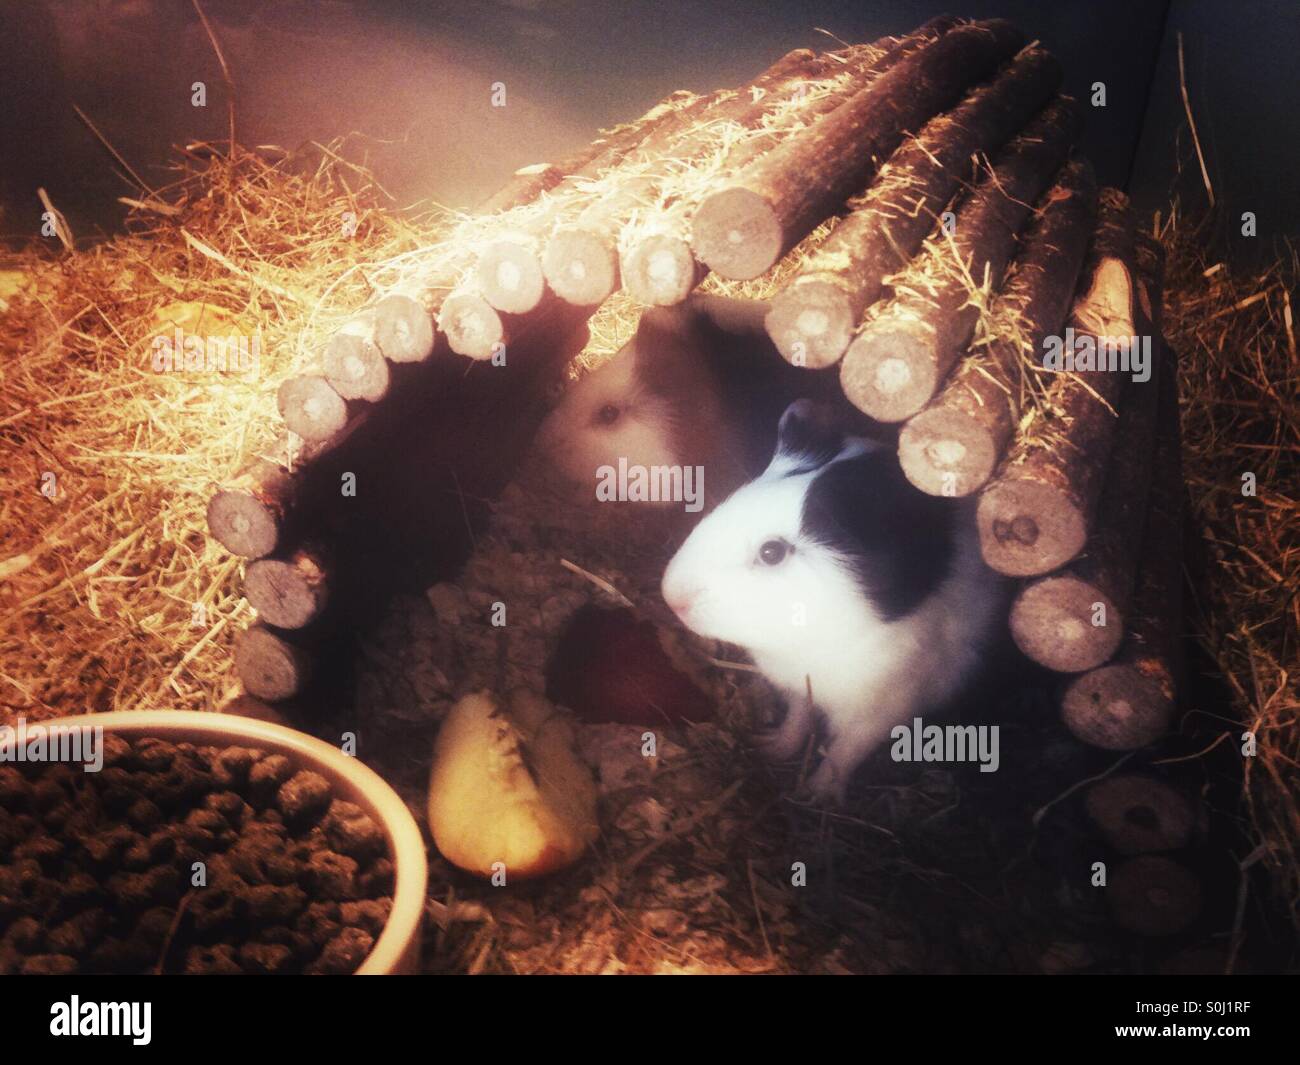 Two hamsters in a log shelter Stock Photo